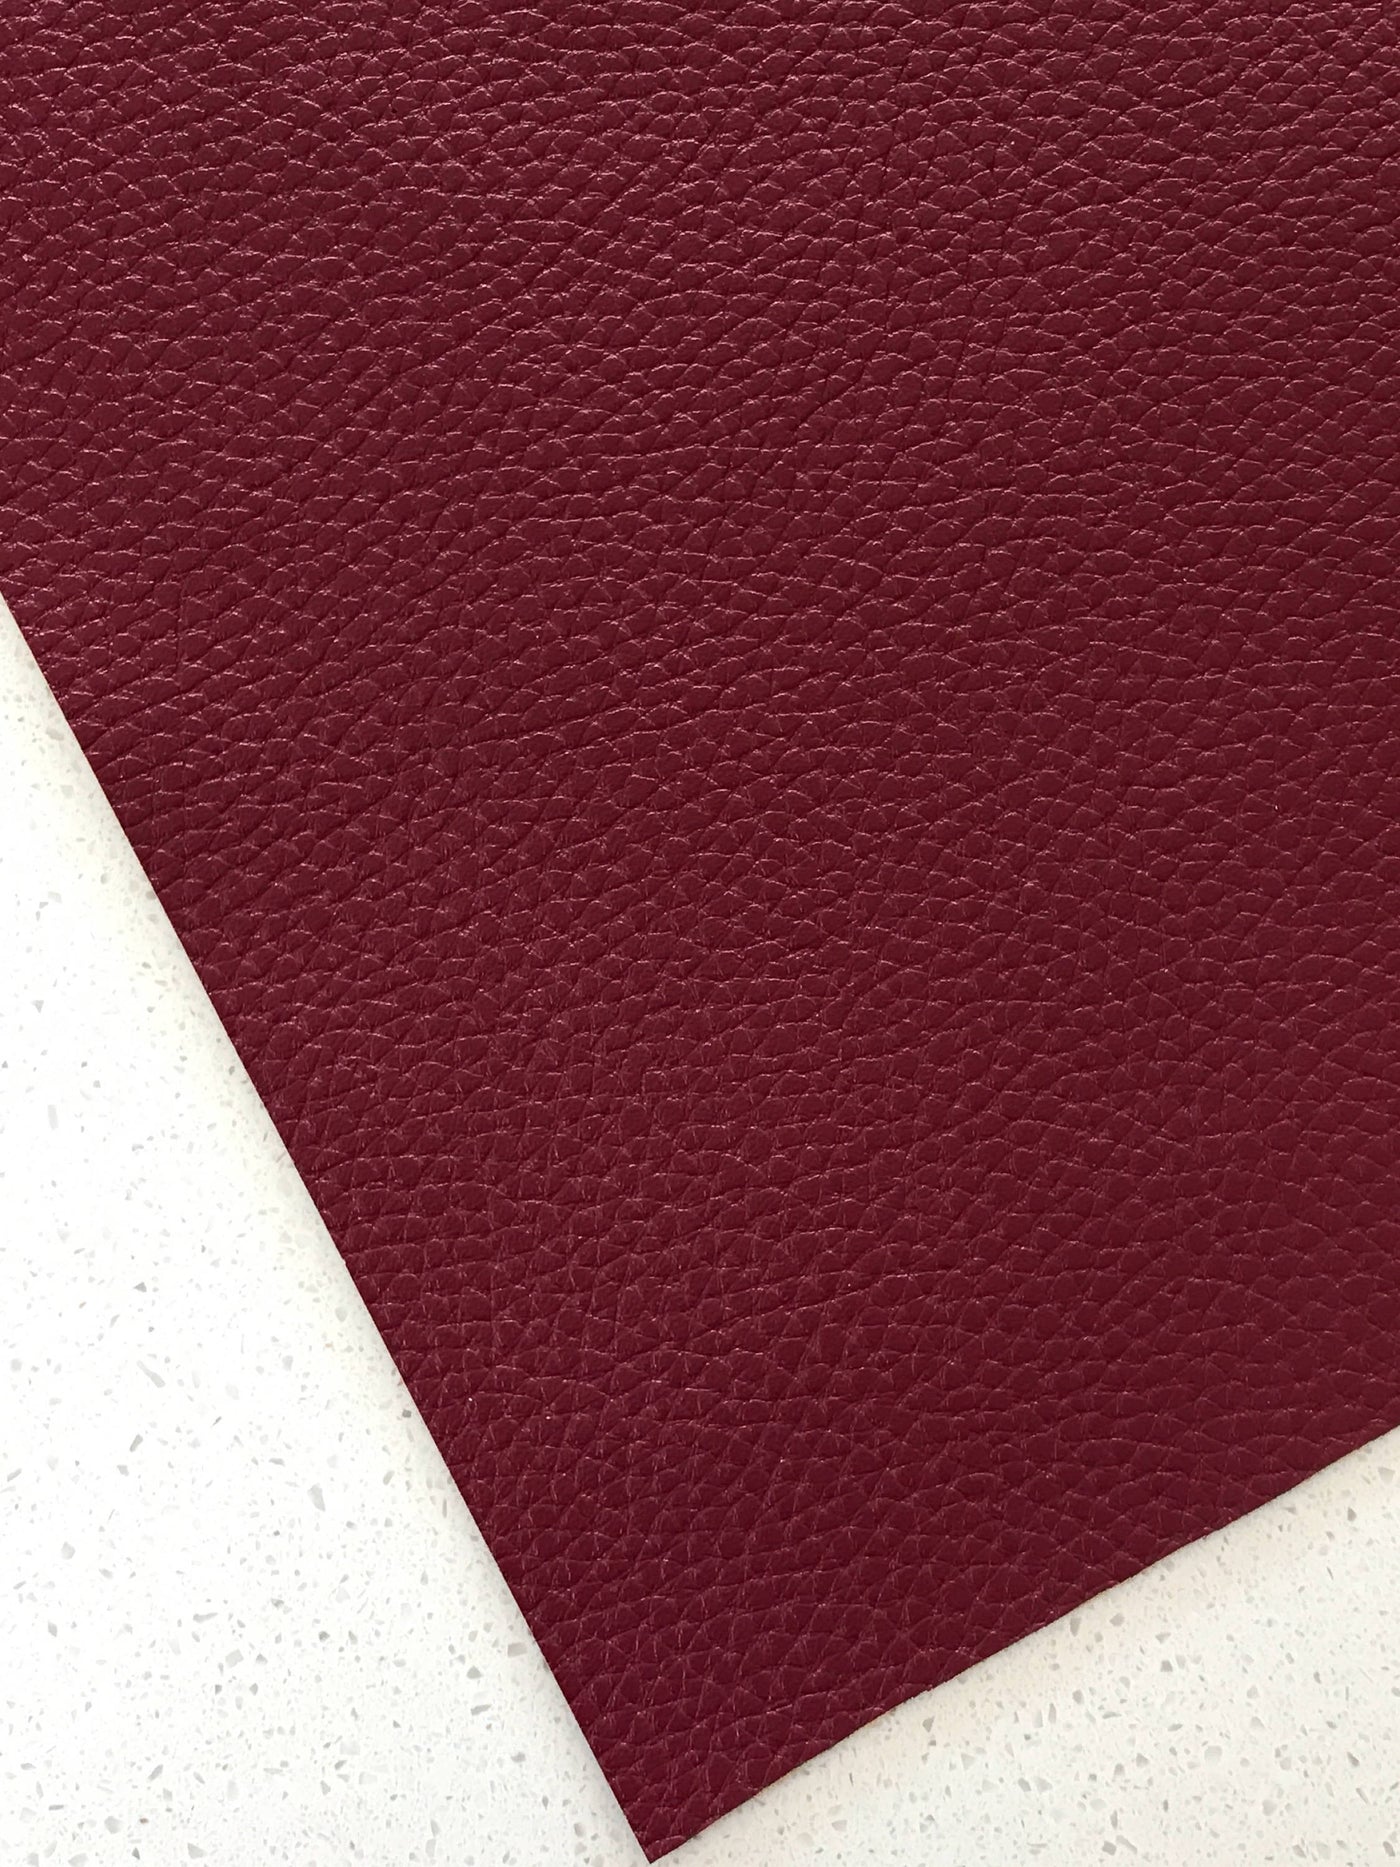 Marone Textured Leatherette Sheet Thick 1.0mm Litchi Print Leatherette